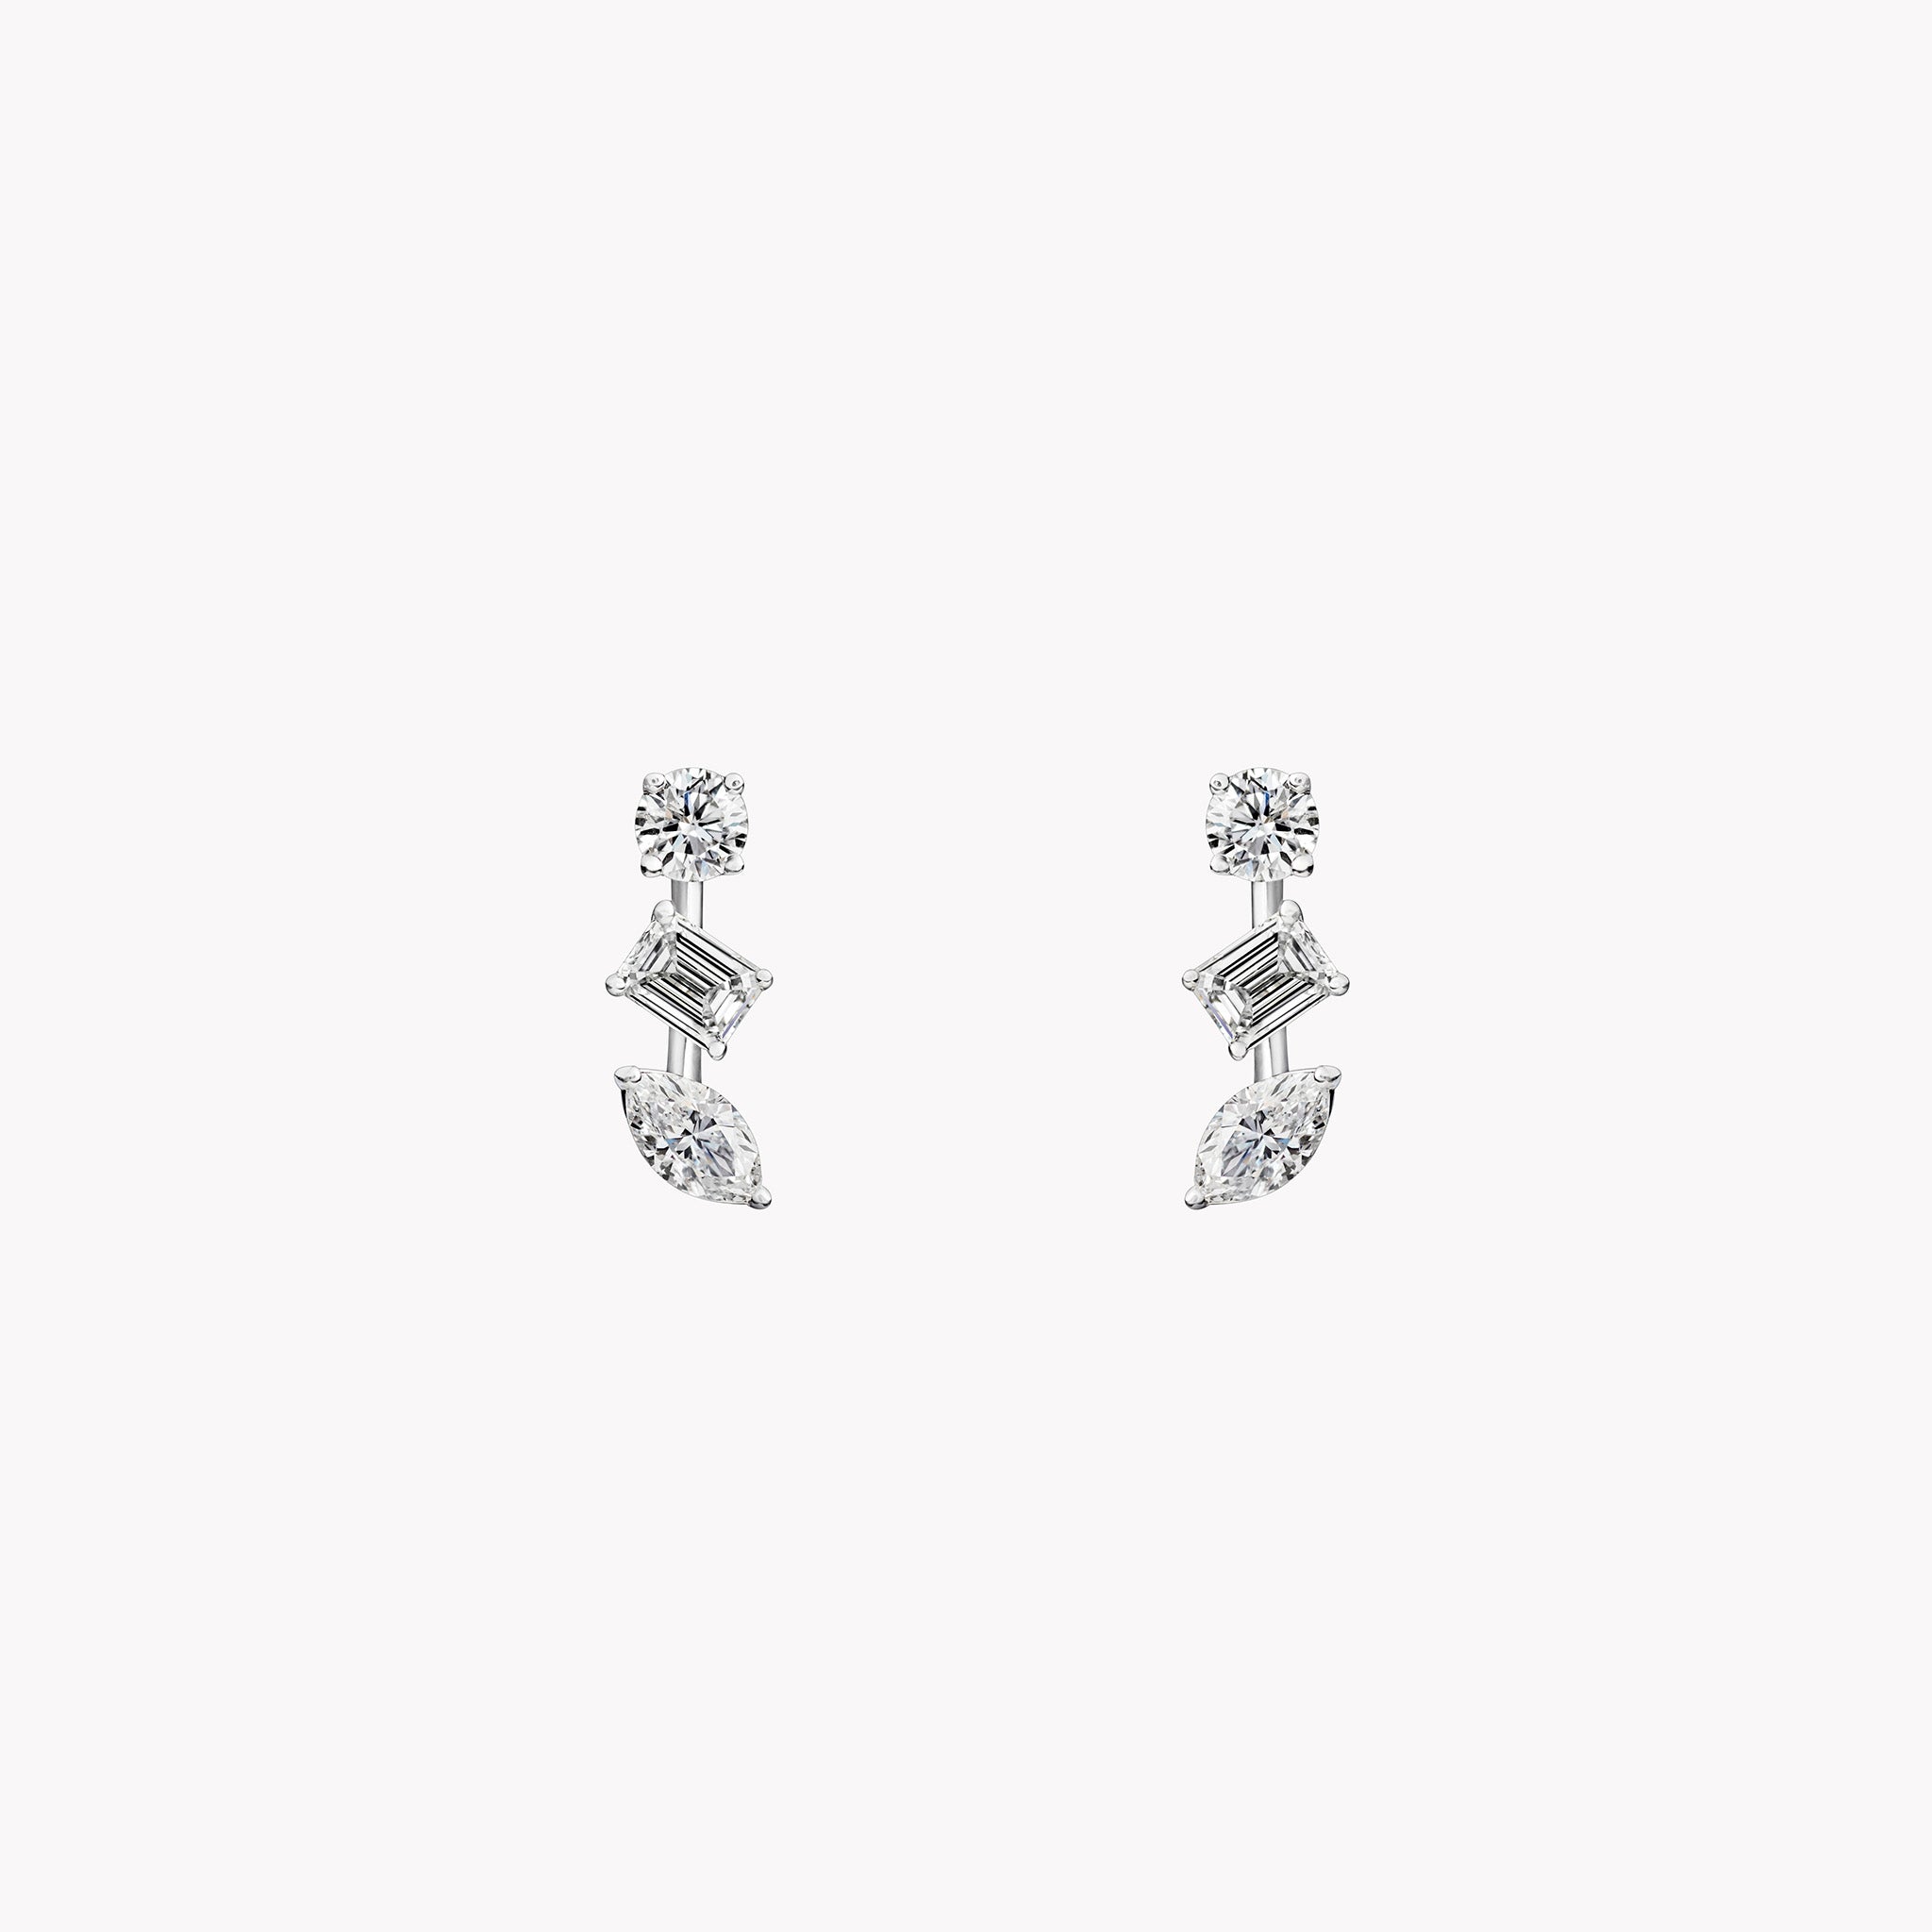 Material Good | Fine Jewelry | Earrings – Page 3